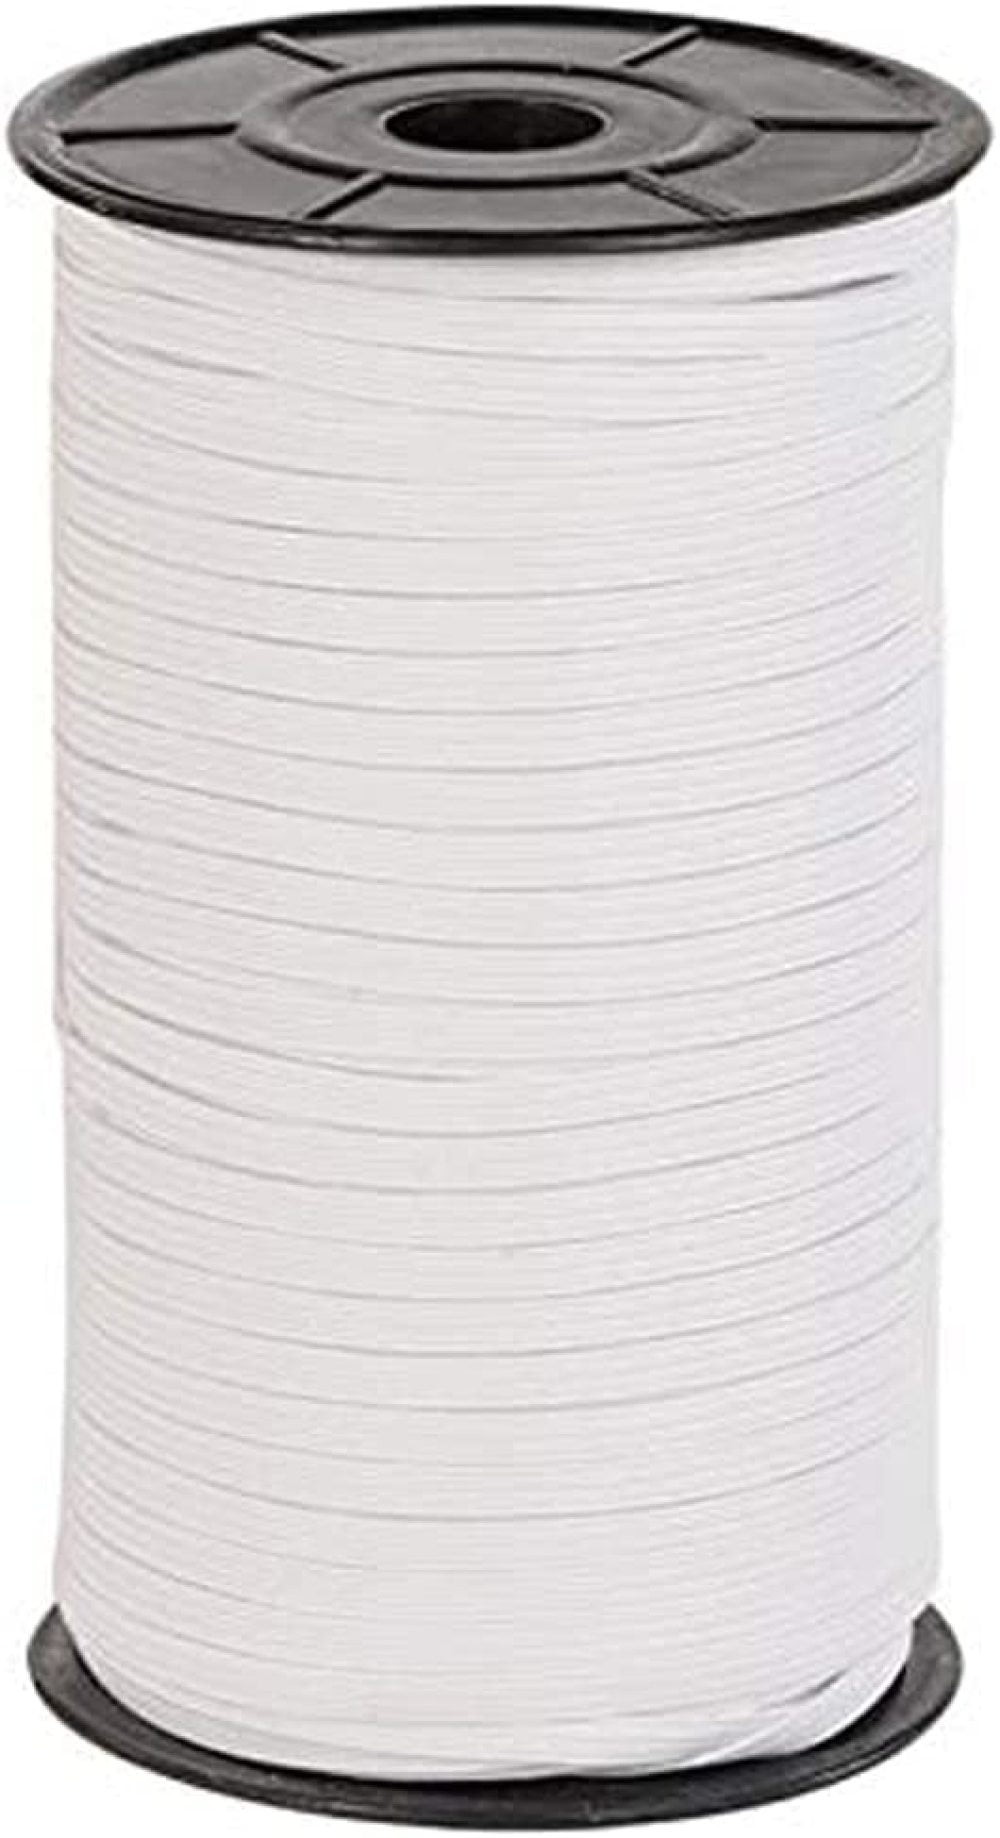 White, 200 Yards-1/8 inch Bedspread Elastic Cord Cuff Heavy Elastic String for Crafts DIY Elastic Bands for Sewing 1/8 Inch 